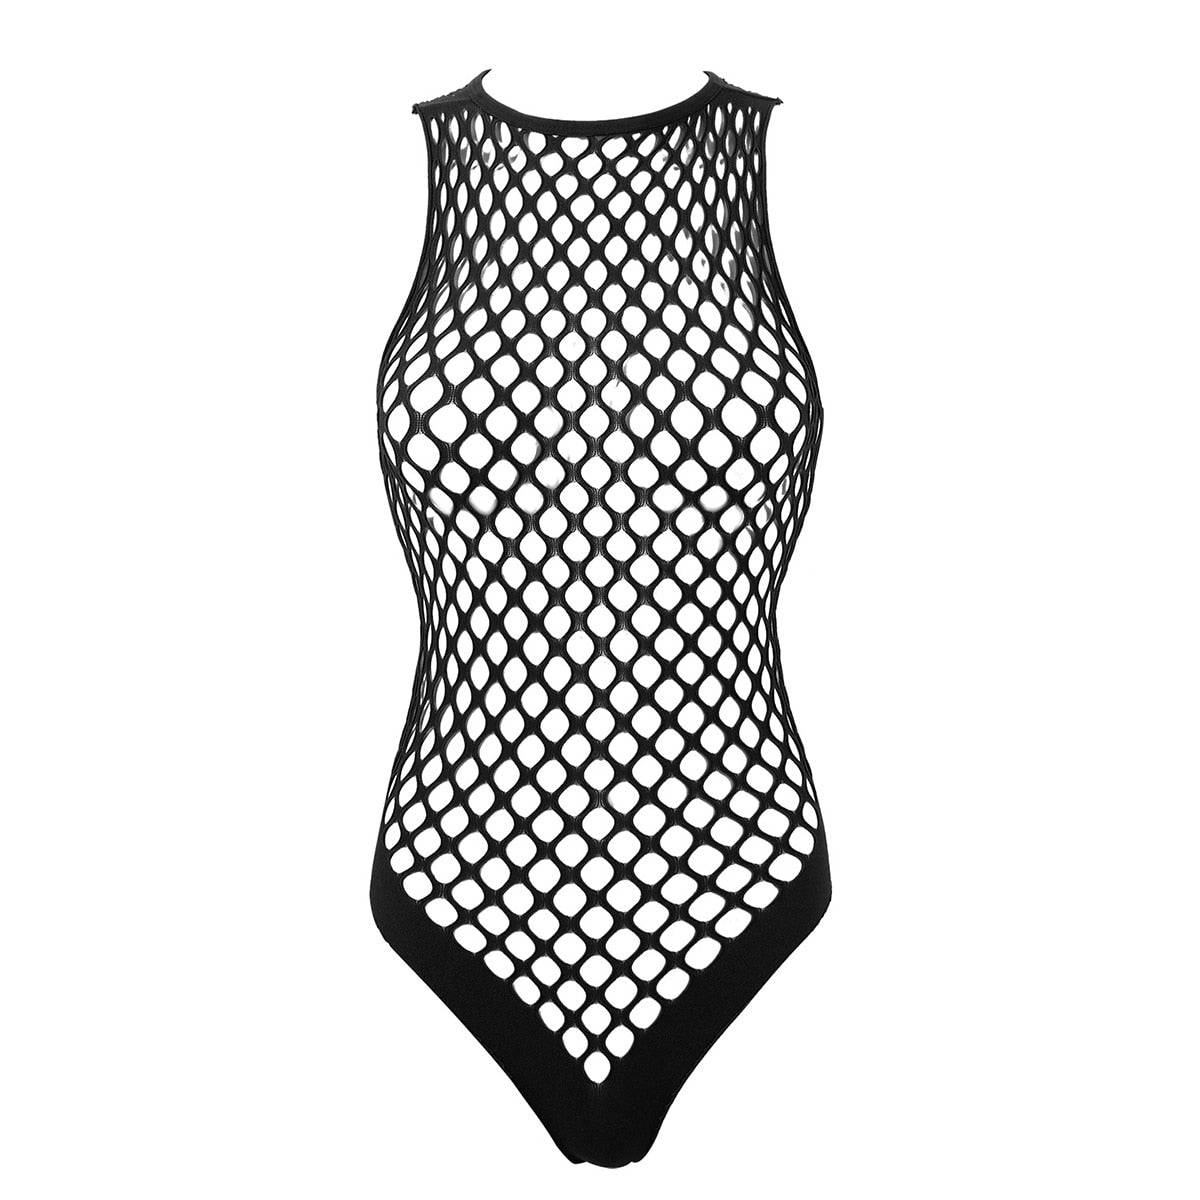 Rags n Rituals 'Fatal Attraction' Fishnet Bodysuit at $21.99 USD